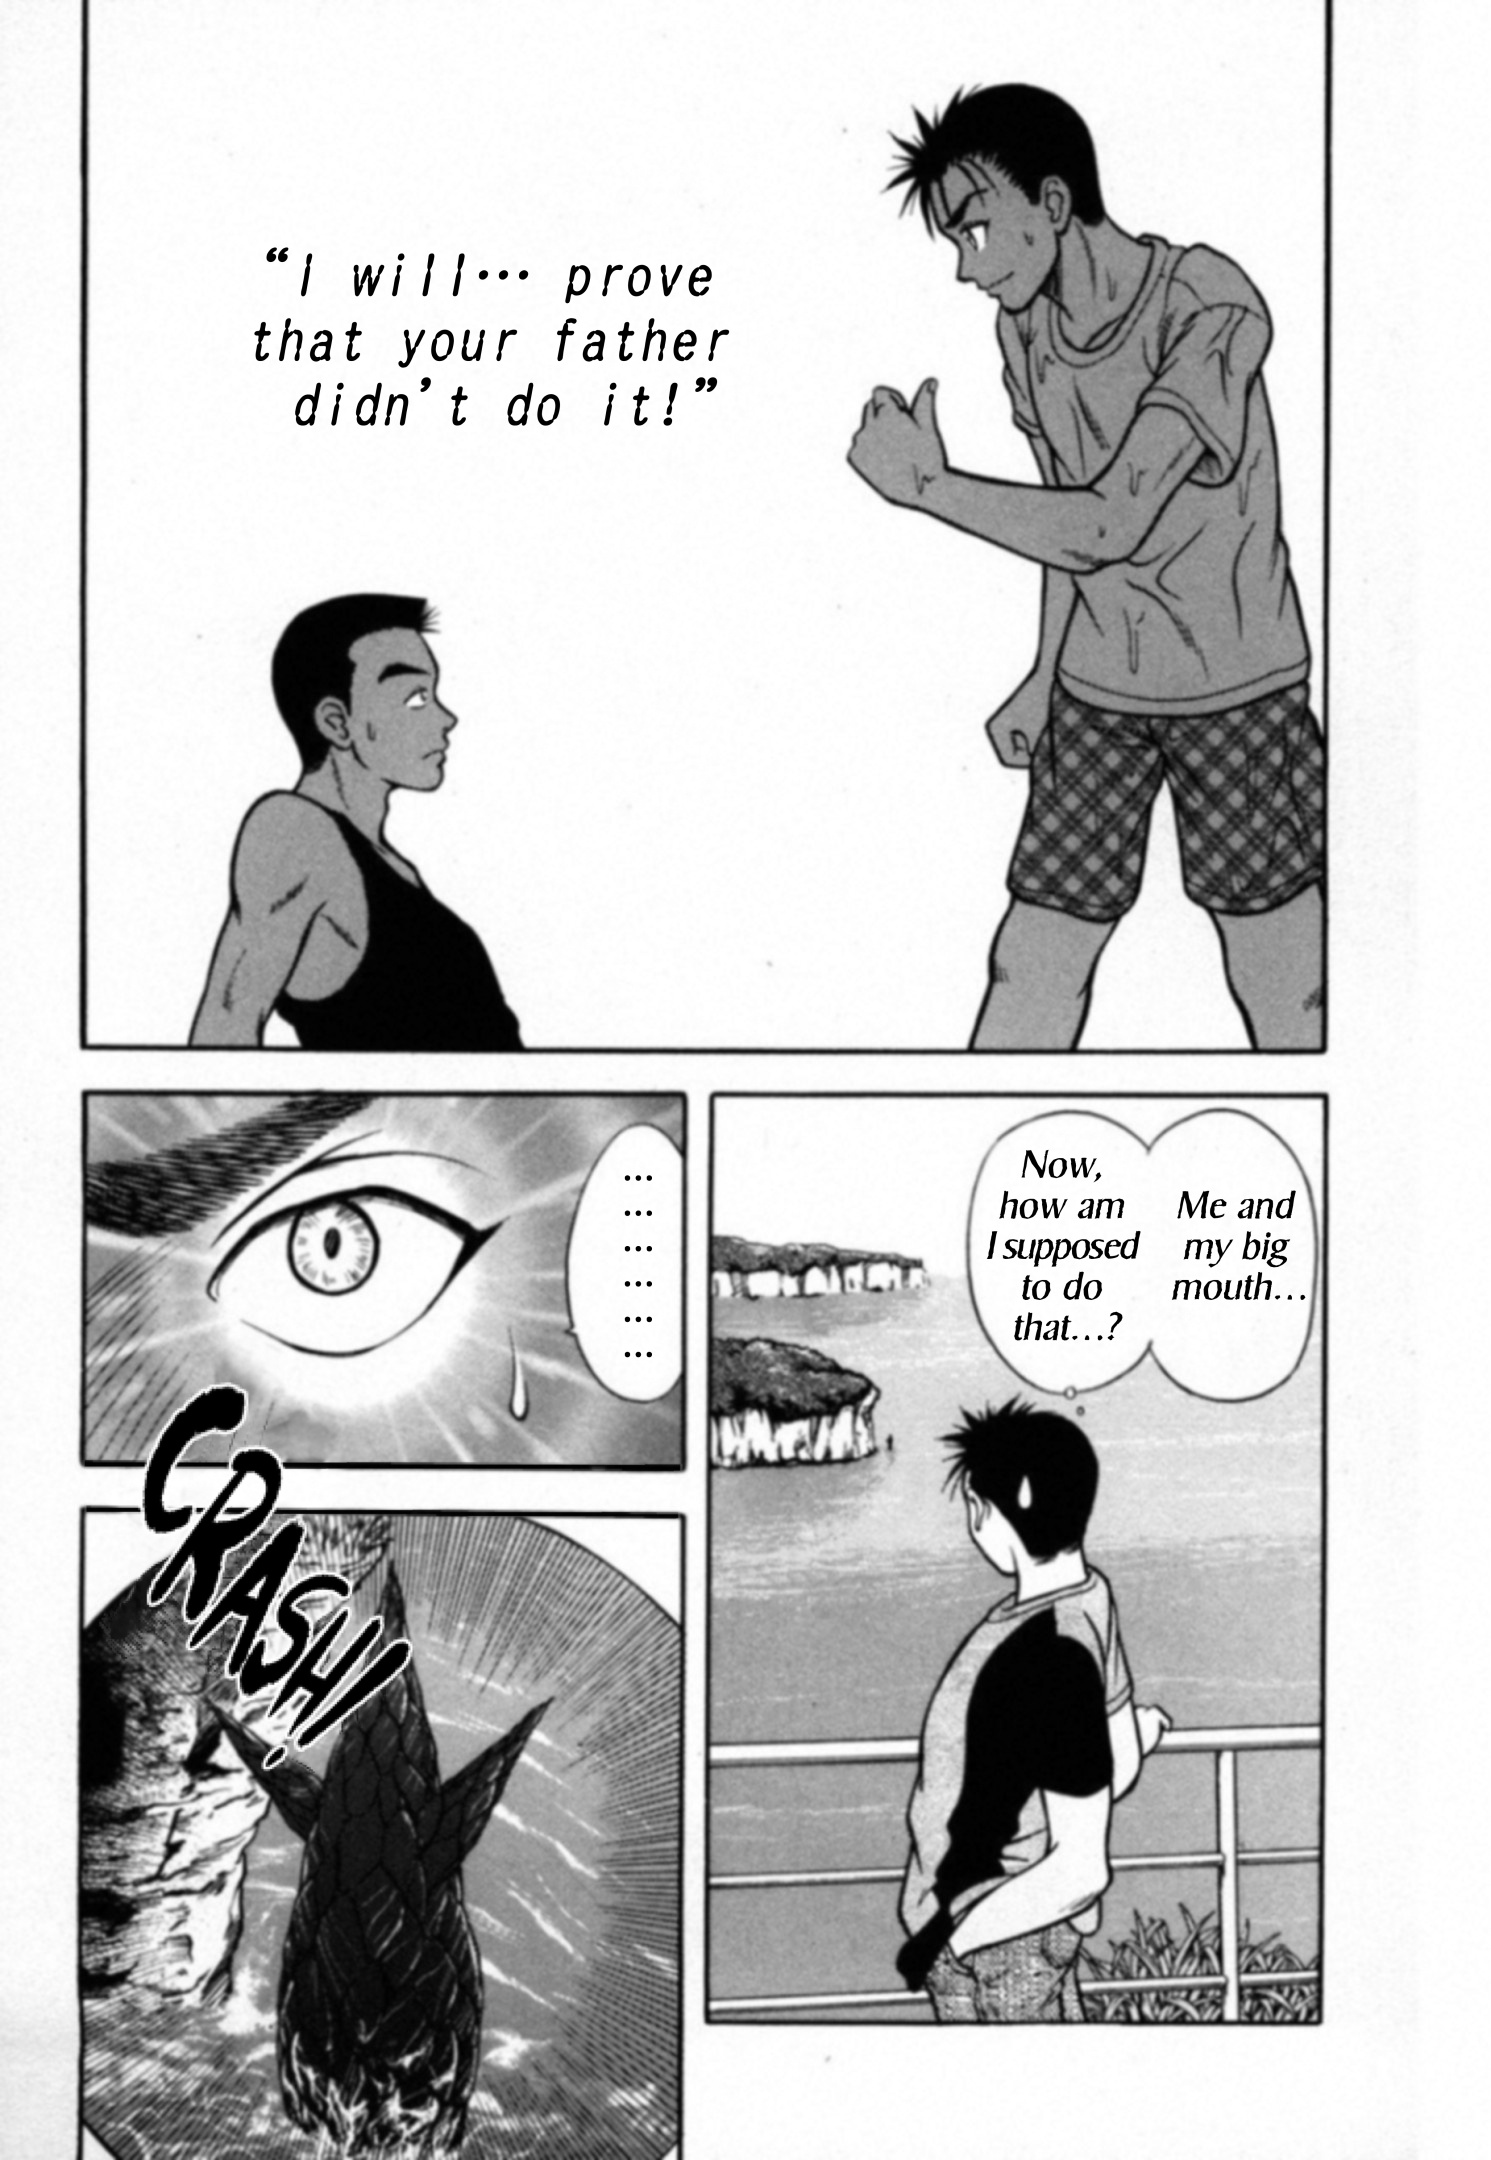 Kakeru Vol.2 Chapter 15: The Island Of Lust - 5 - Picture 2